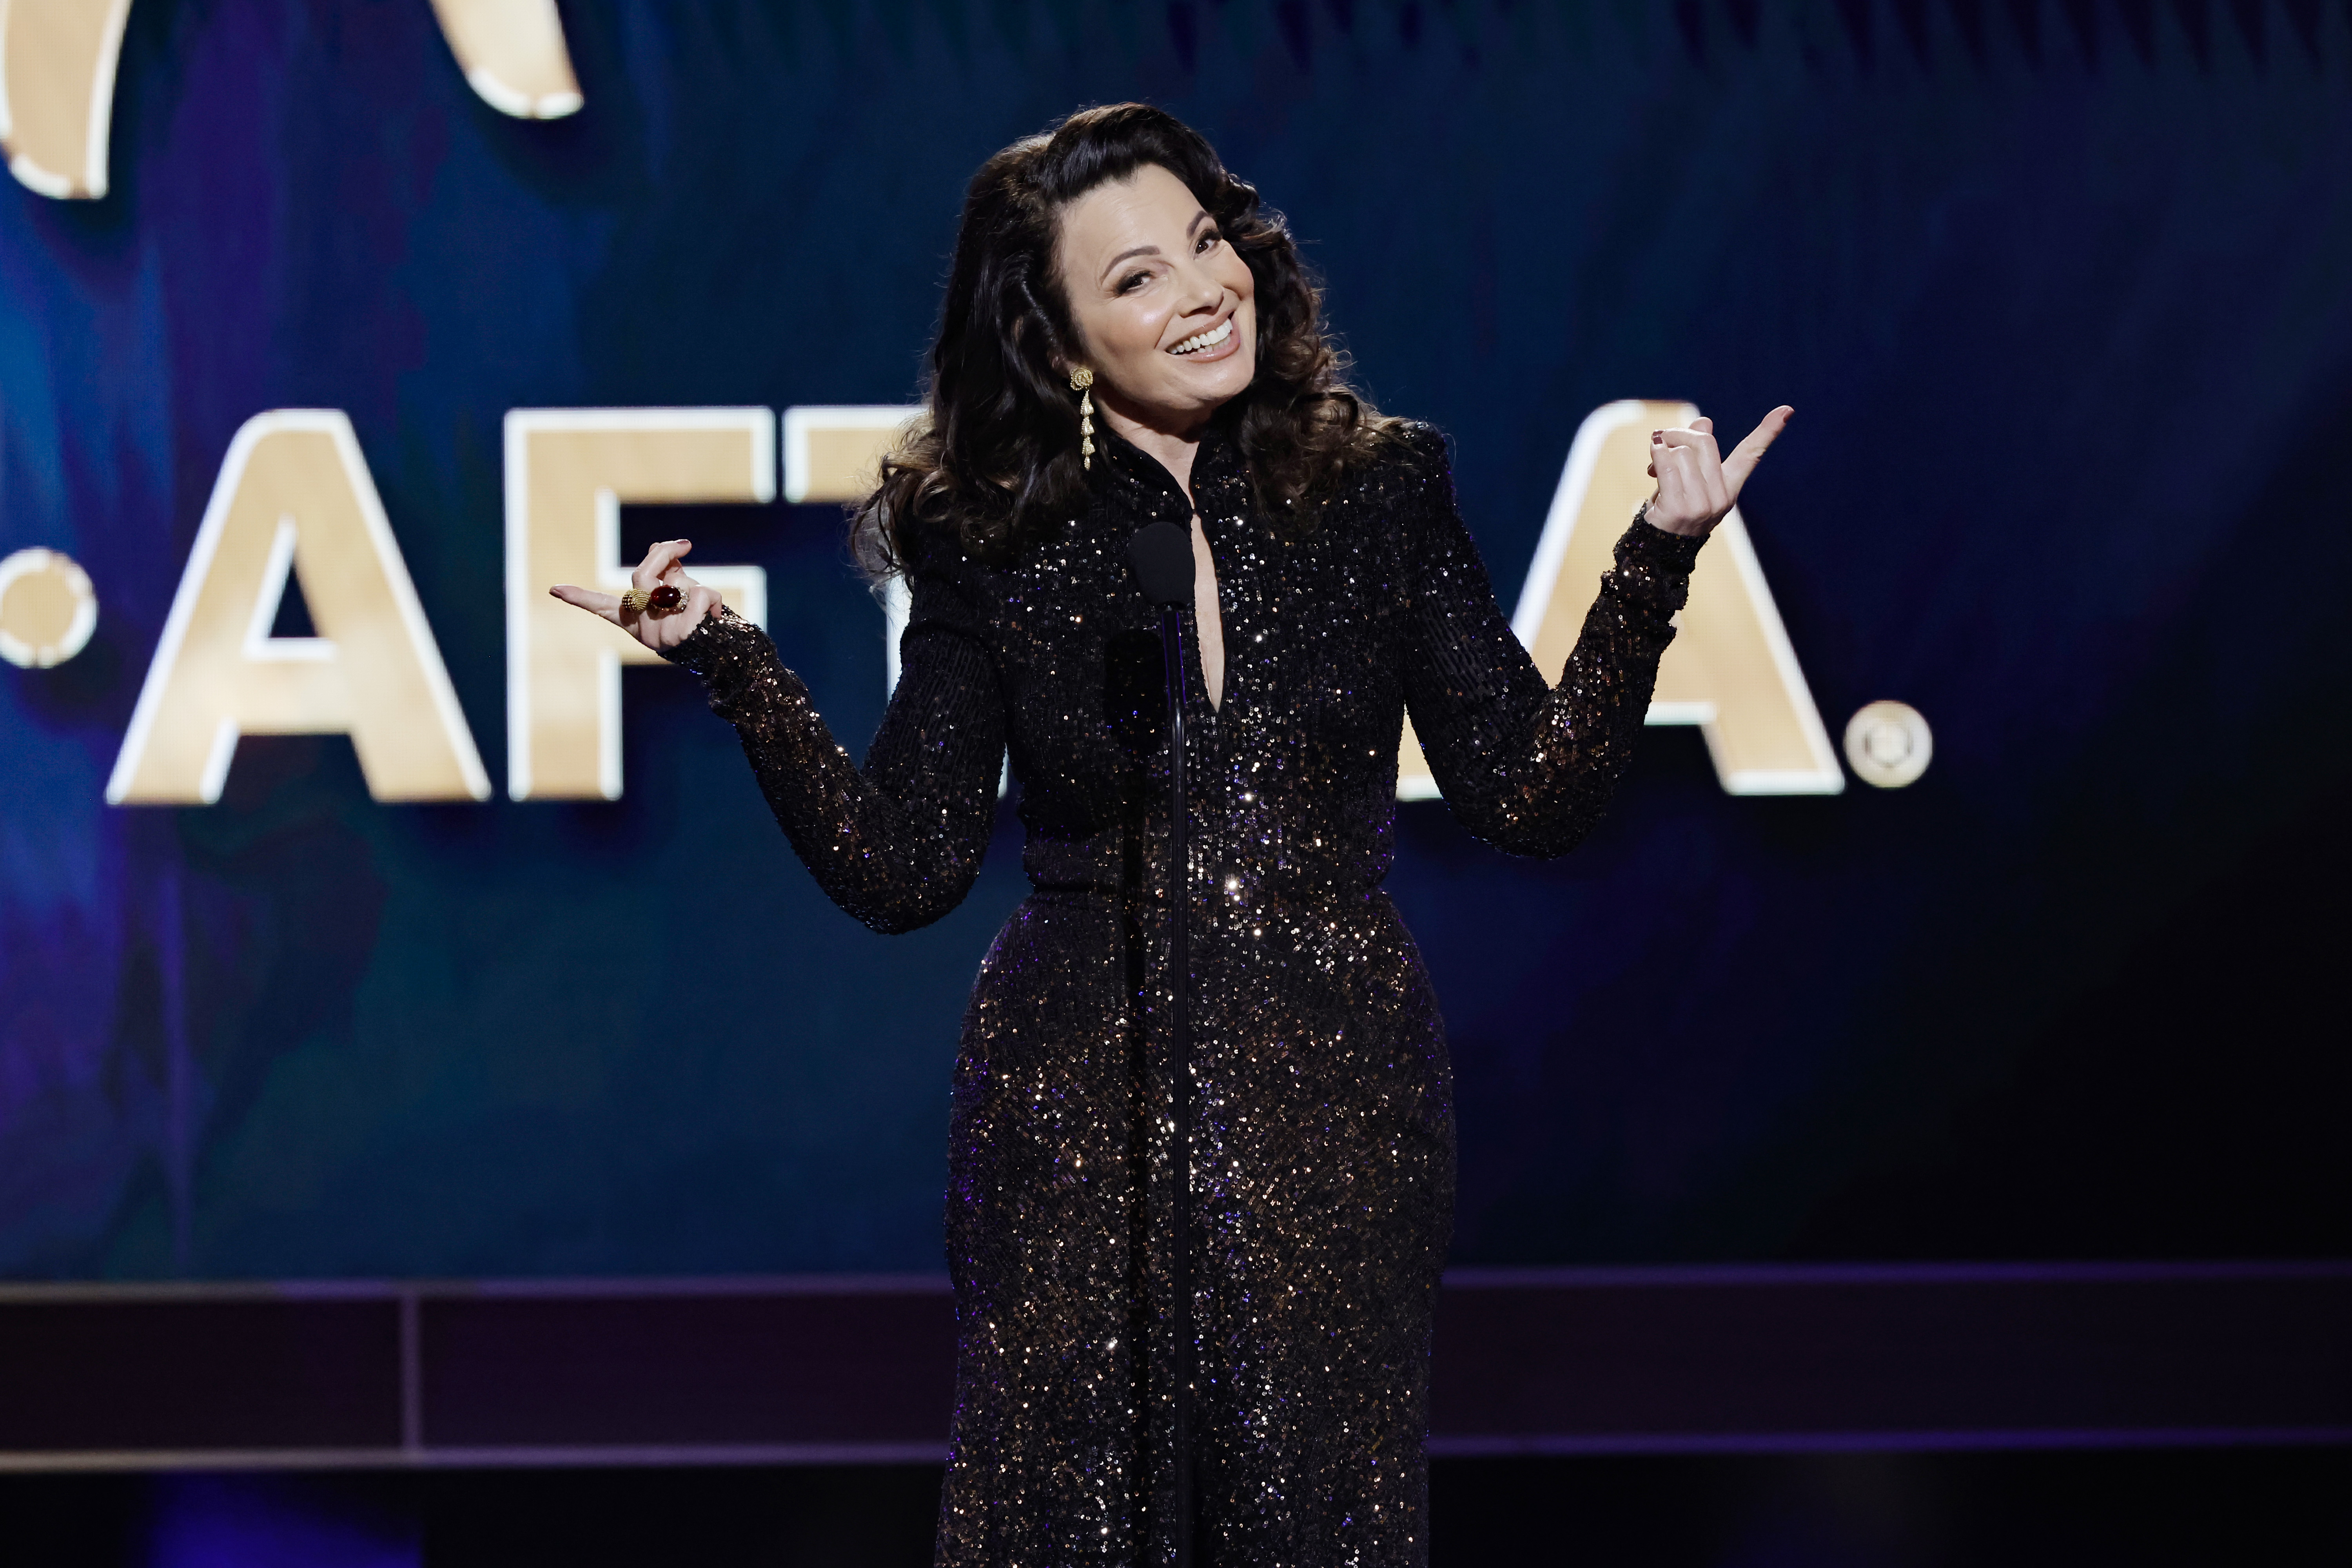 Fran Drescher onstage at the 29th Annual SAG Awards ceremony at Fairmont Century Plaza in Los Angeles, California, on February 26, 2023. | Source: Getty Images